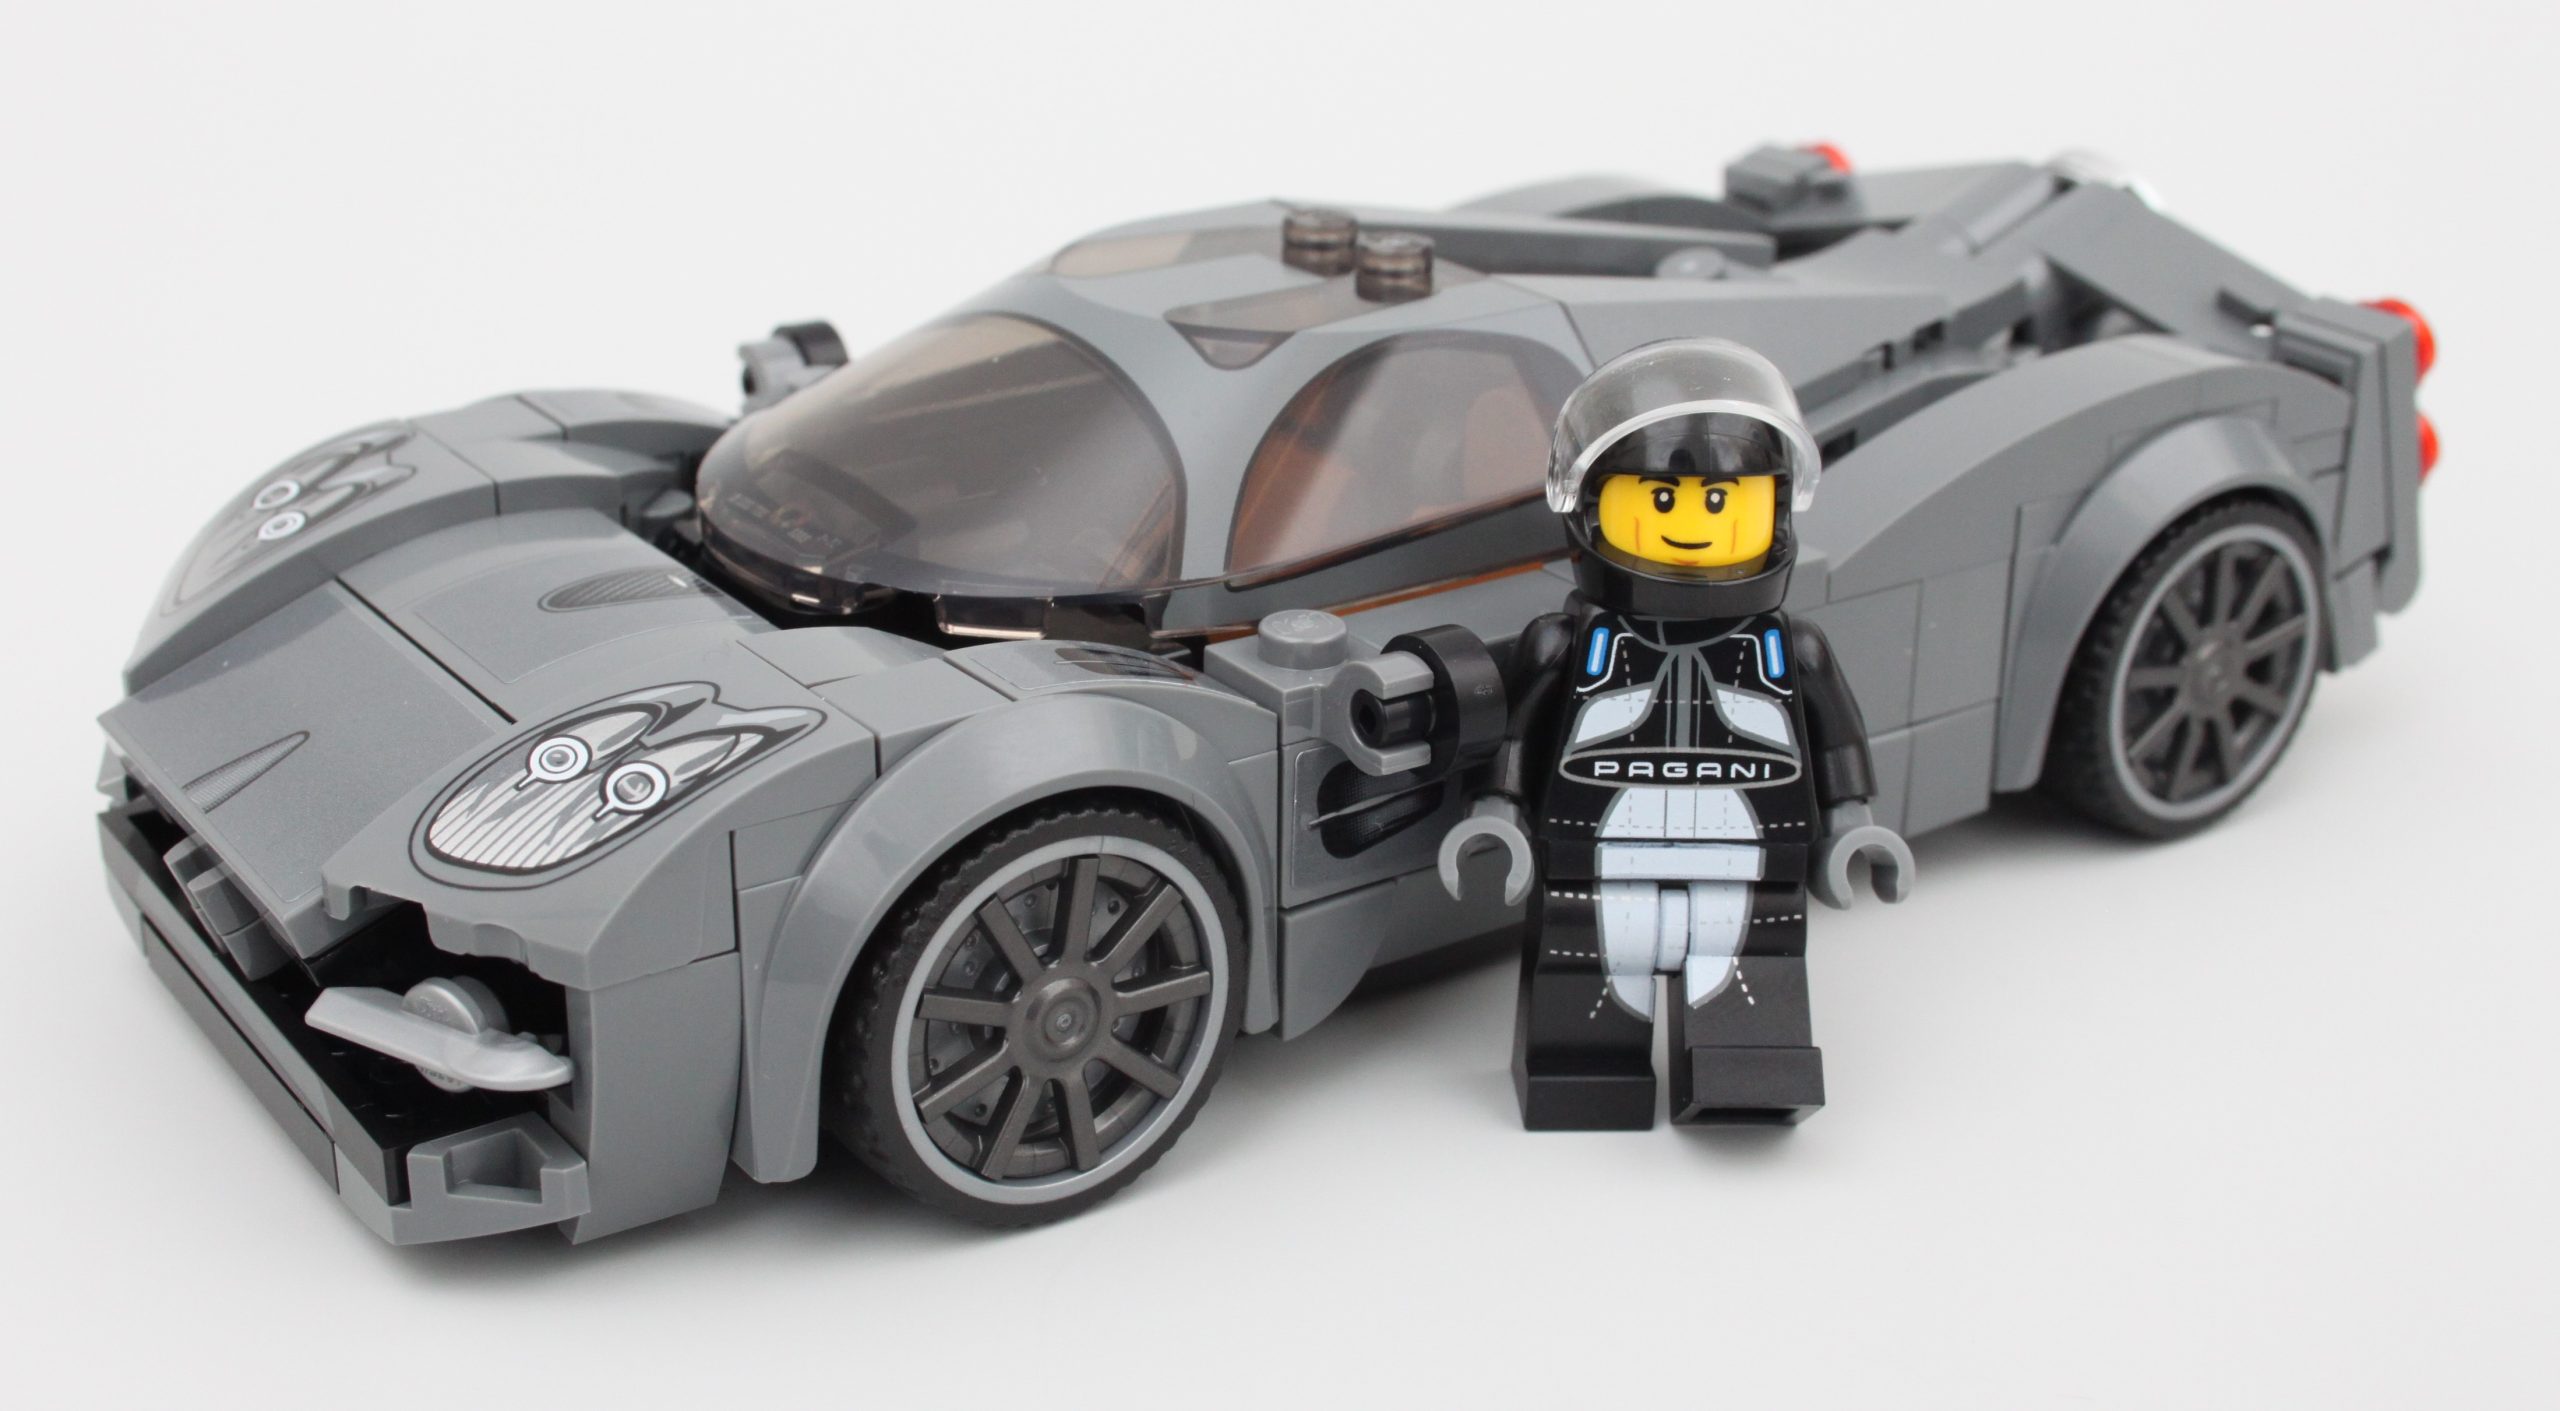 LEGO Speed Champions unveils four new sets coming in March 2023